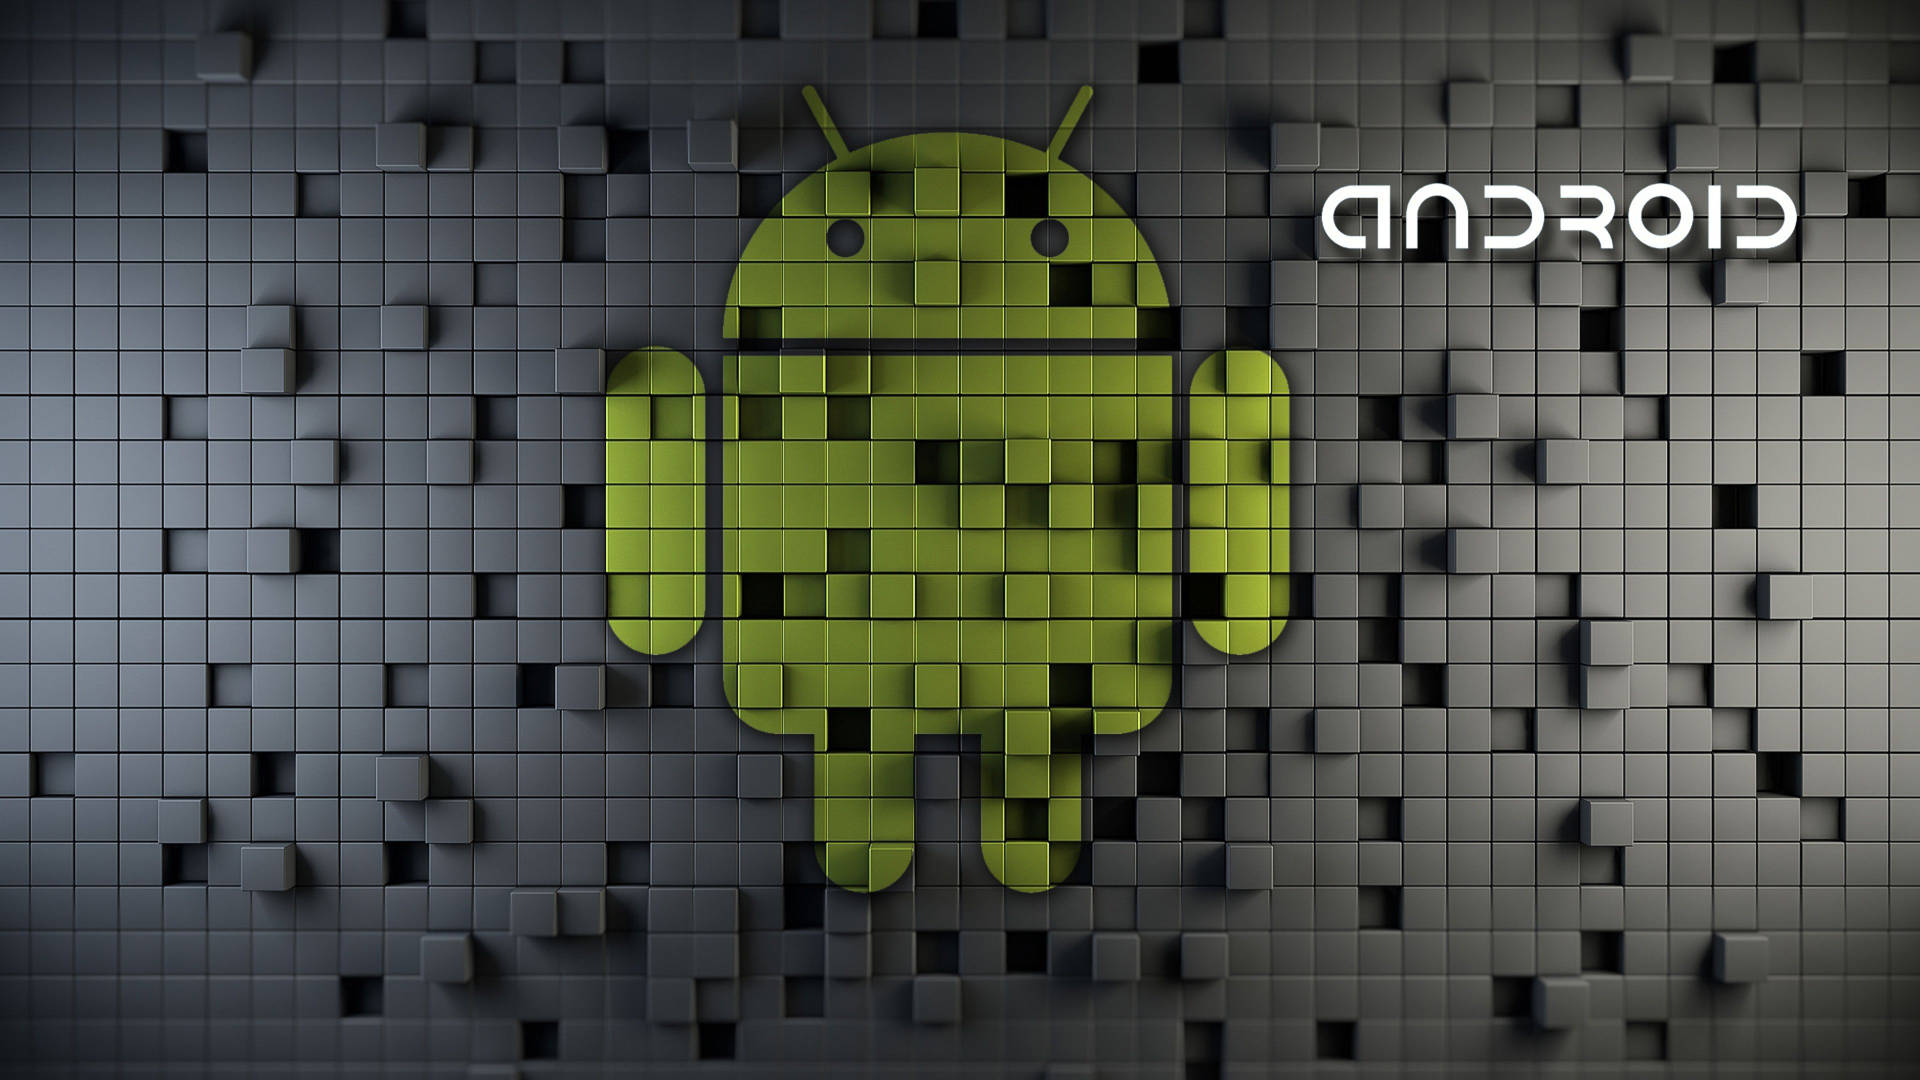 Enjoy Adventures with your Android! Wallpaper